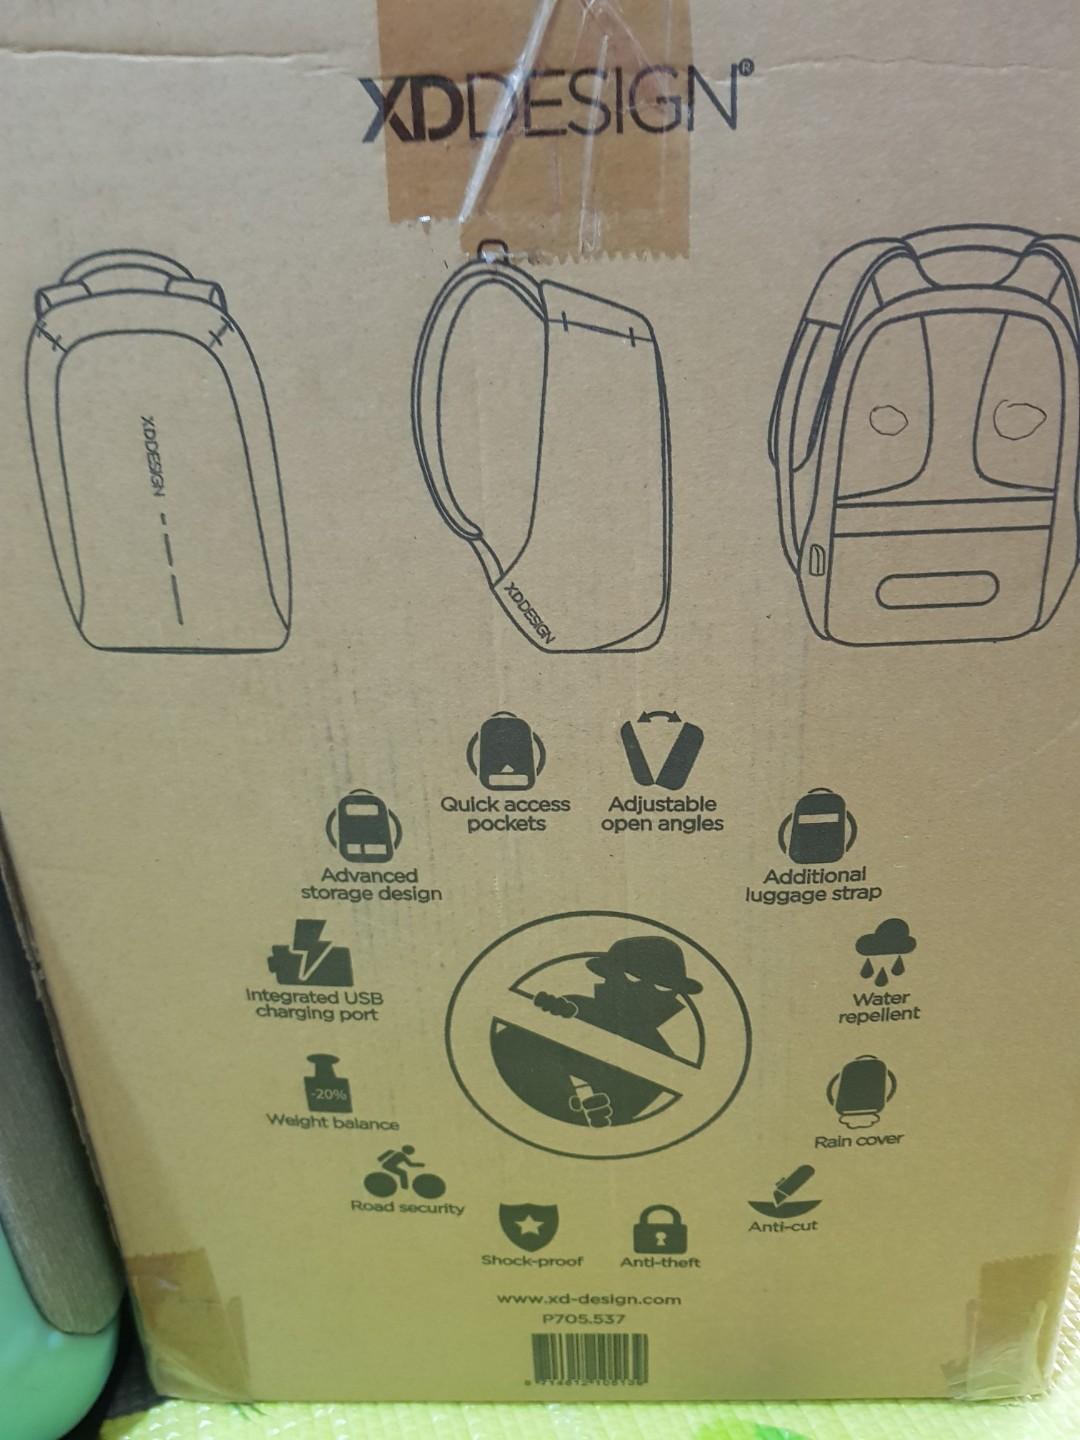 USED XD design anti theft backpack, Hobbies & Toys, Travel, Travel ...